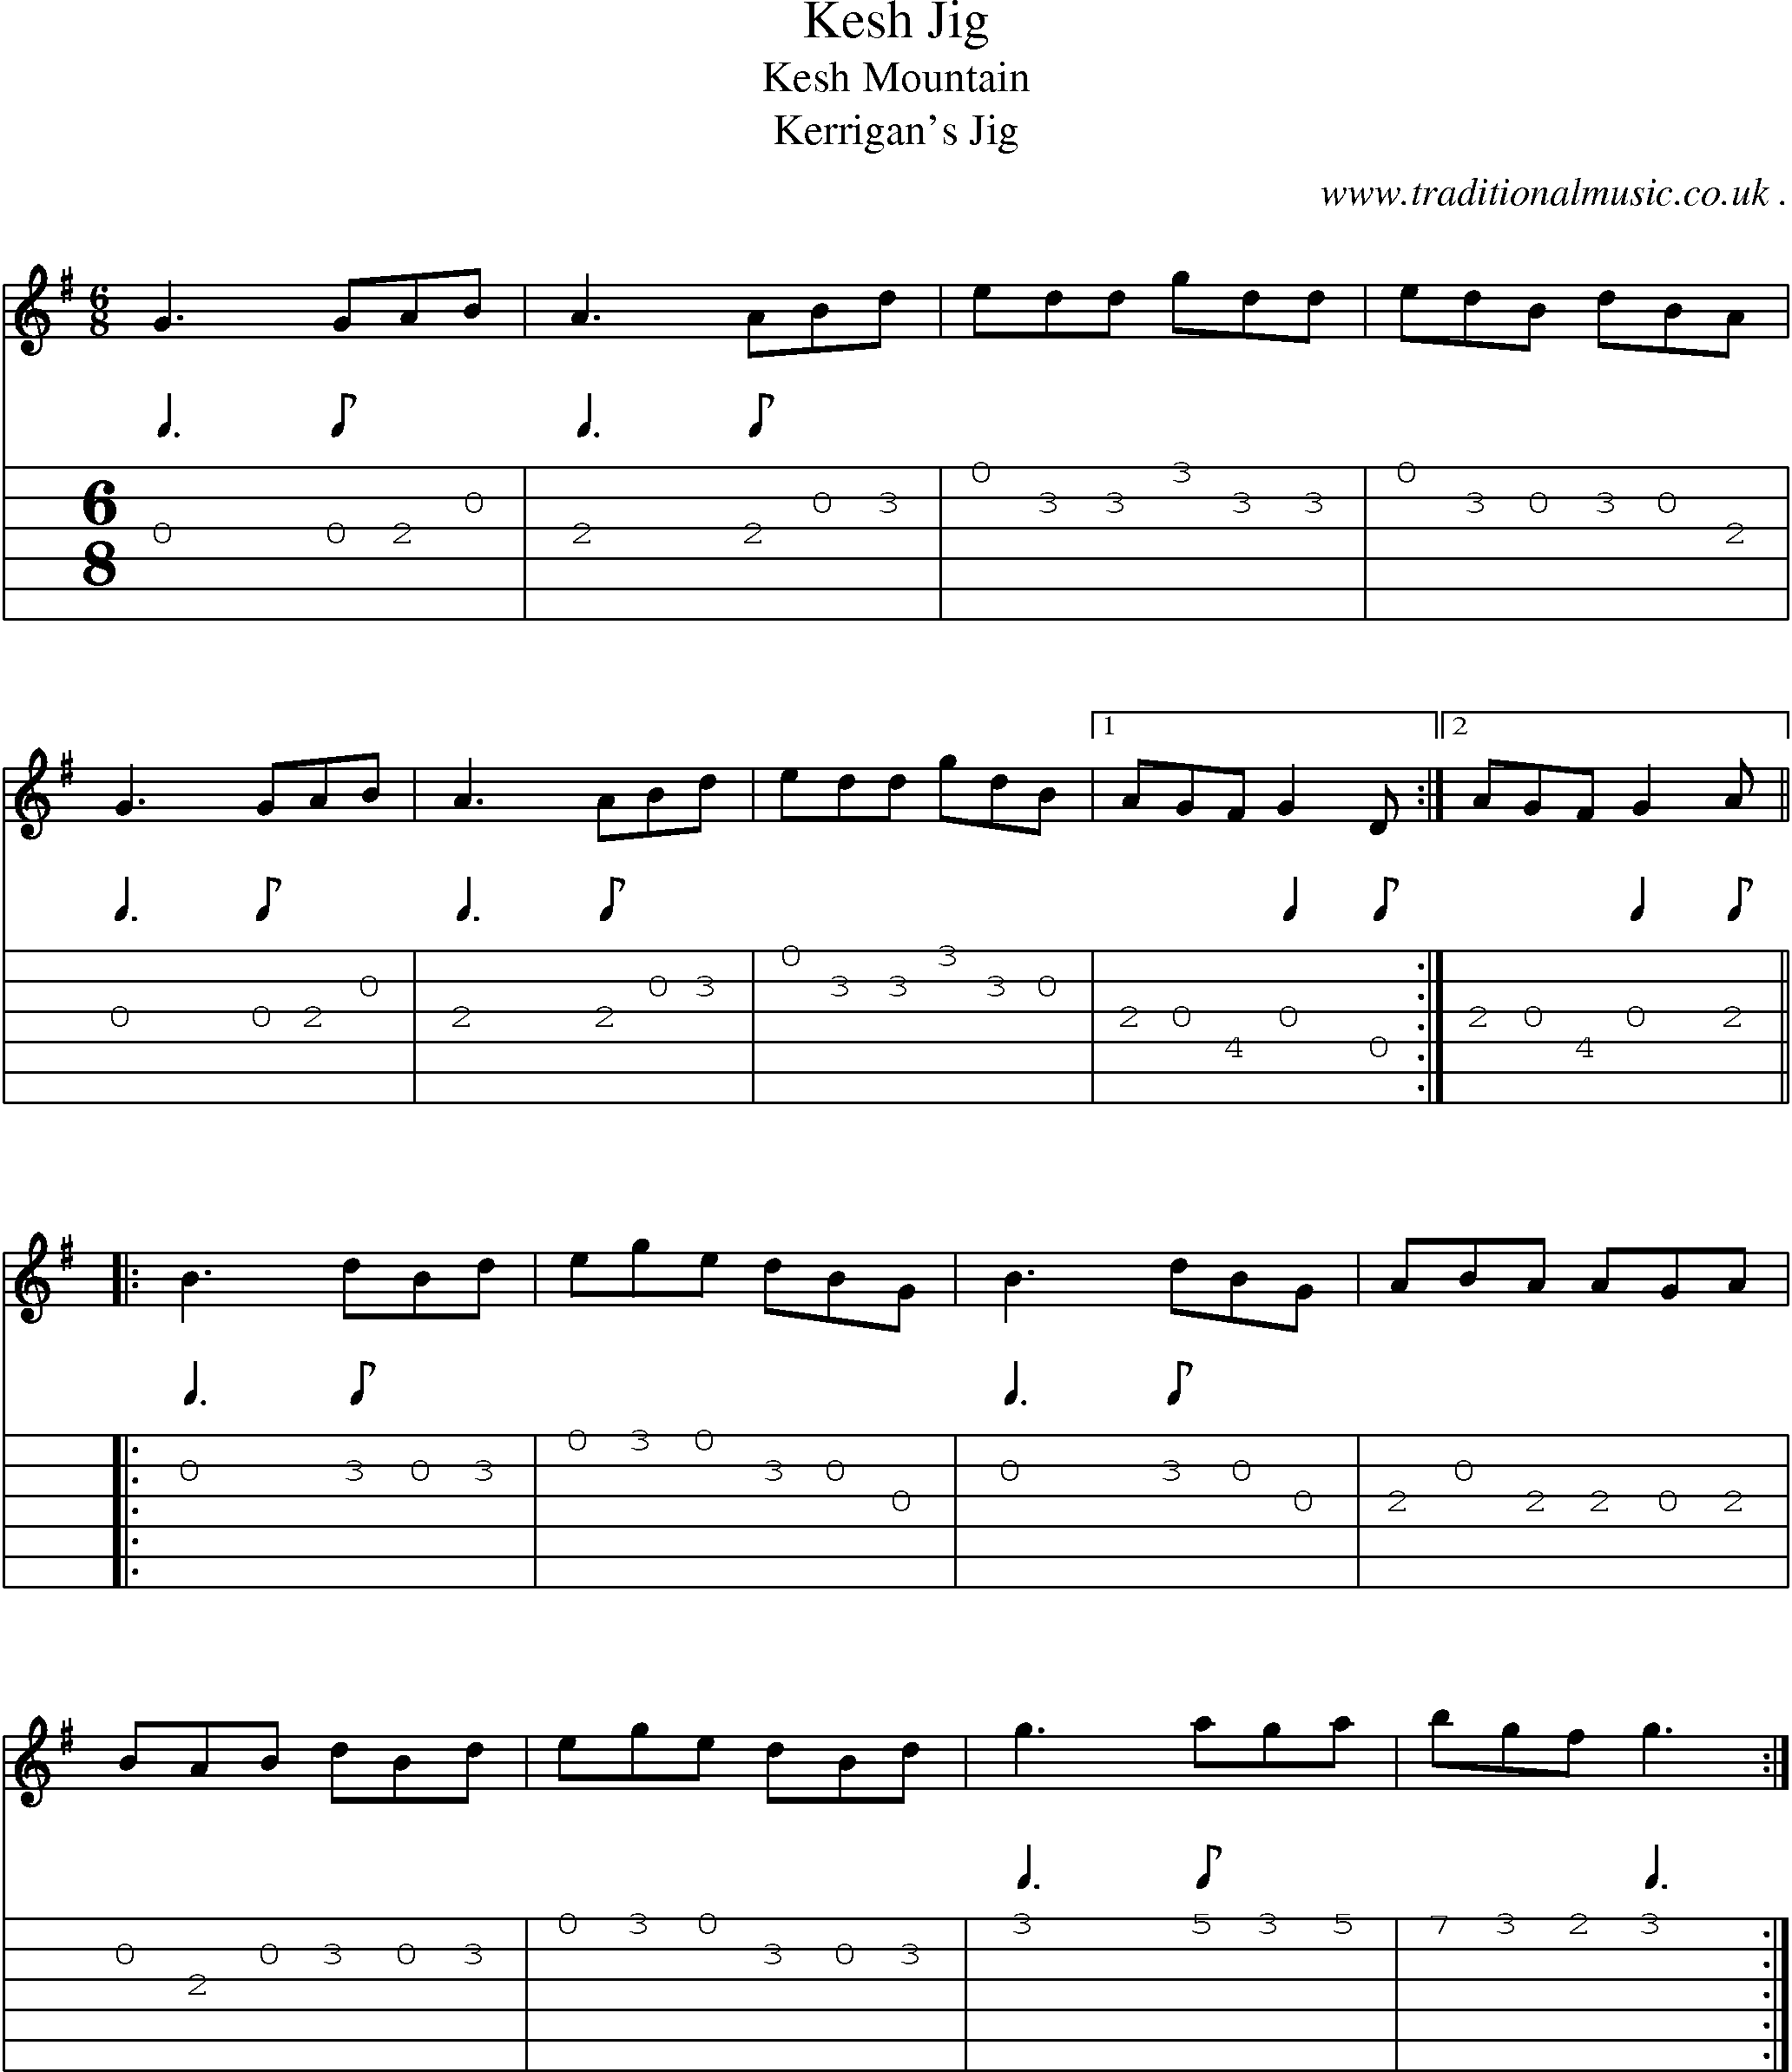 Sheet-Music and Guitar Tabs for Kesh Jig